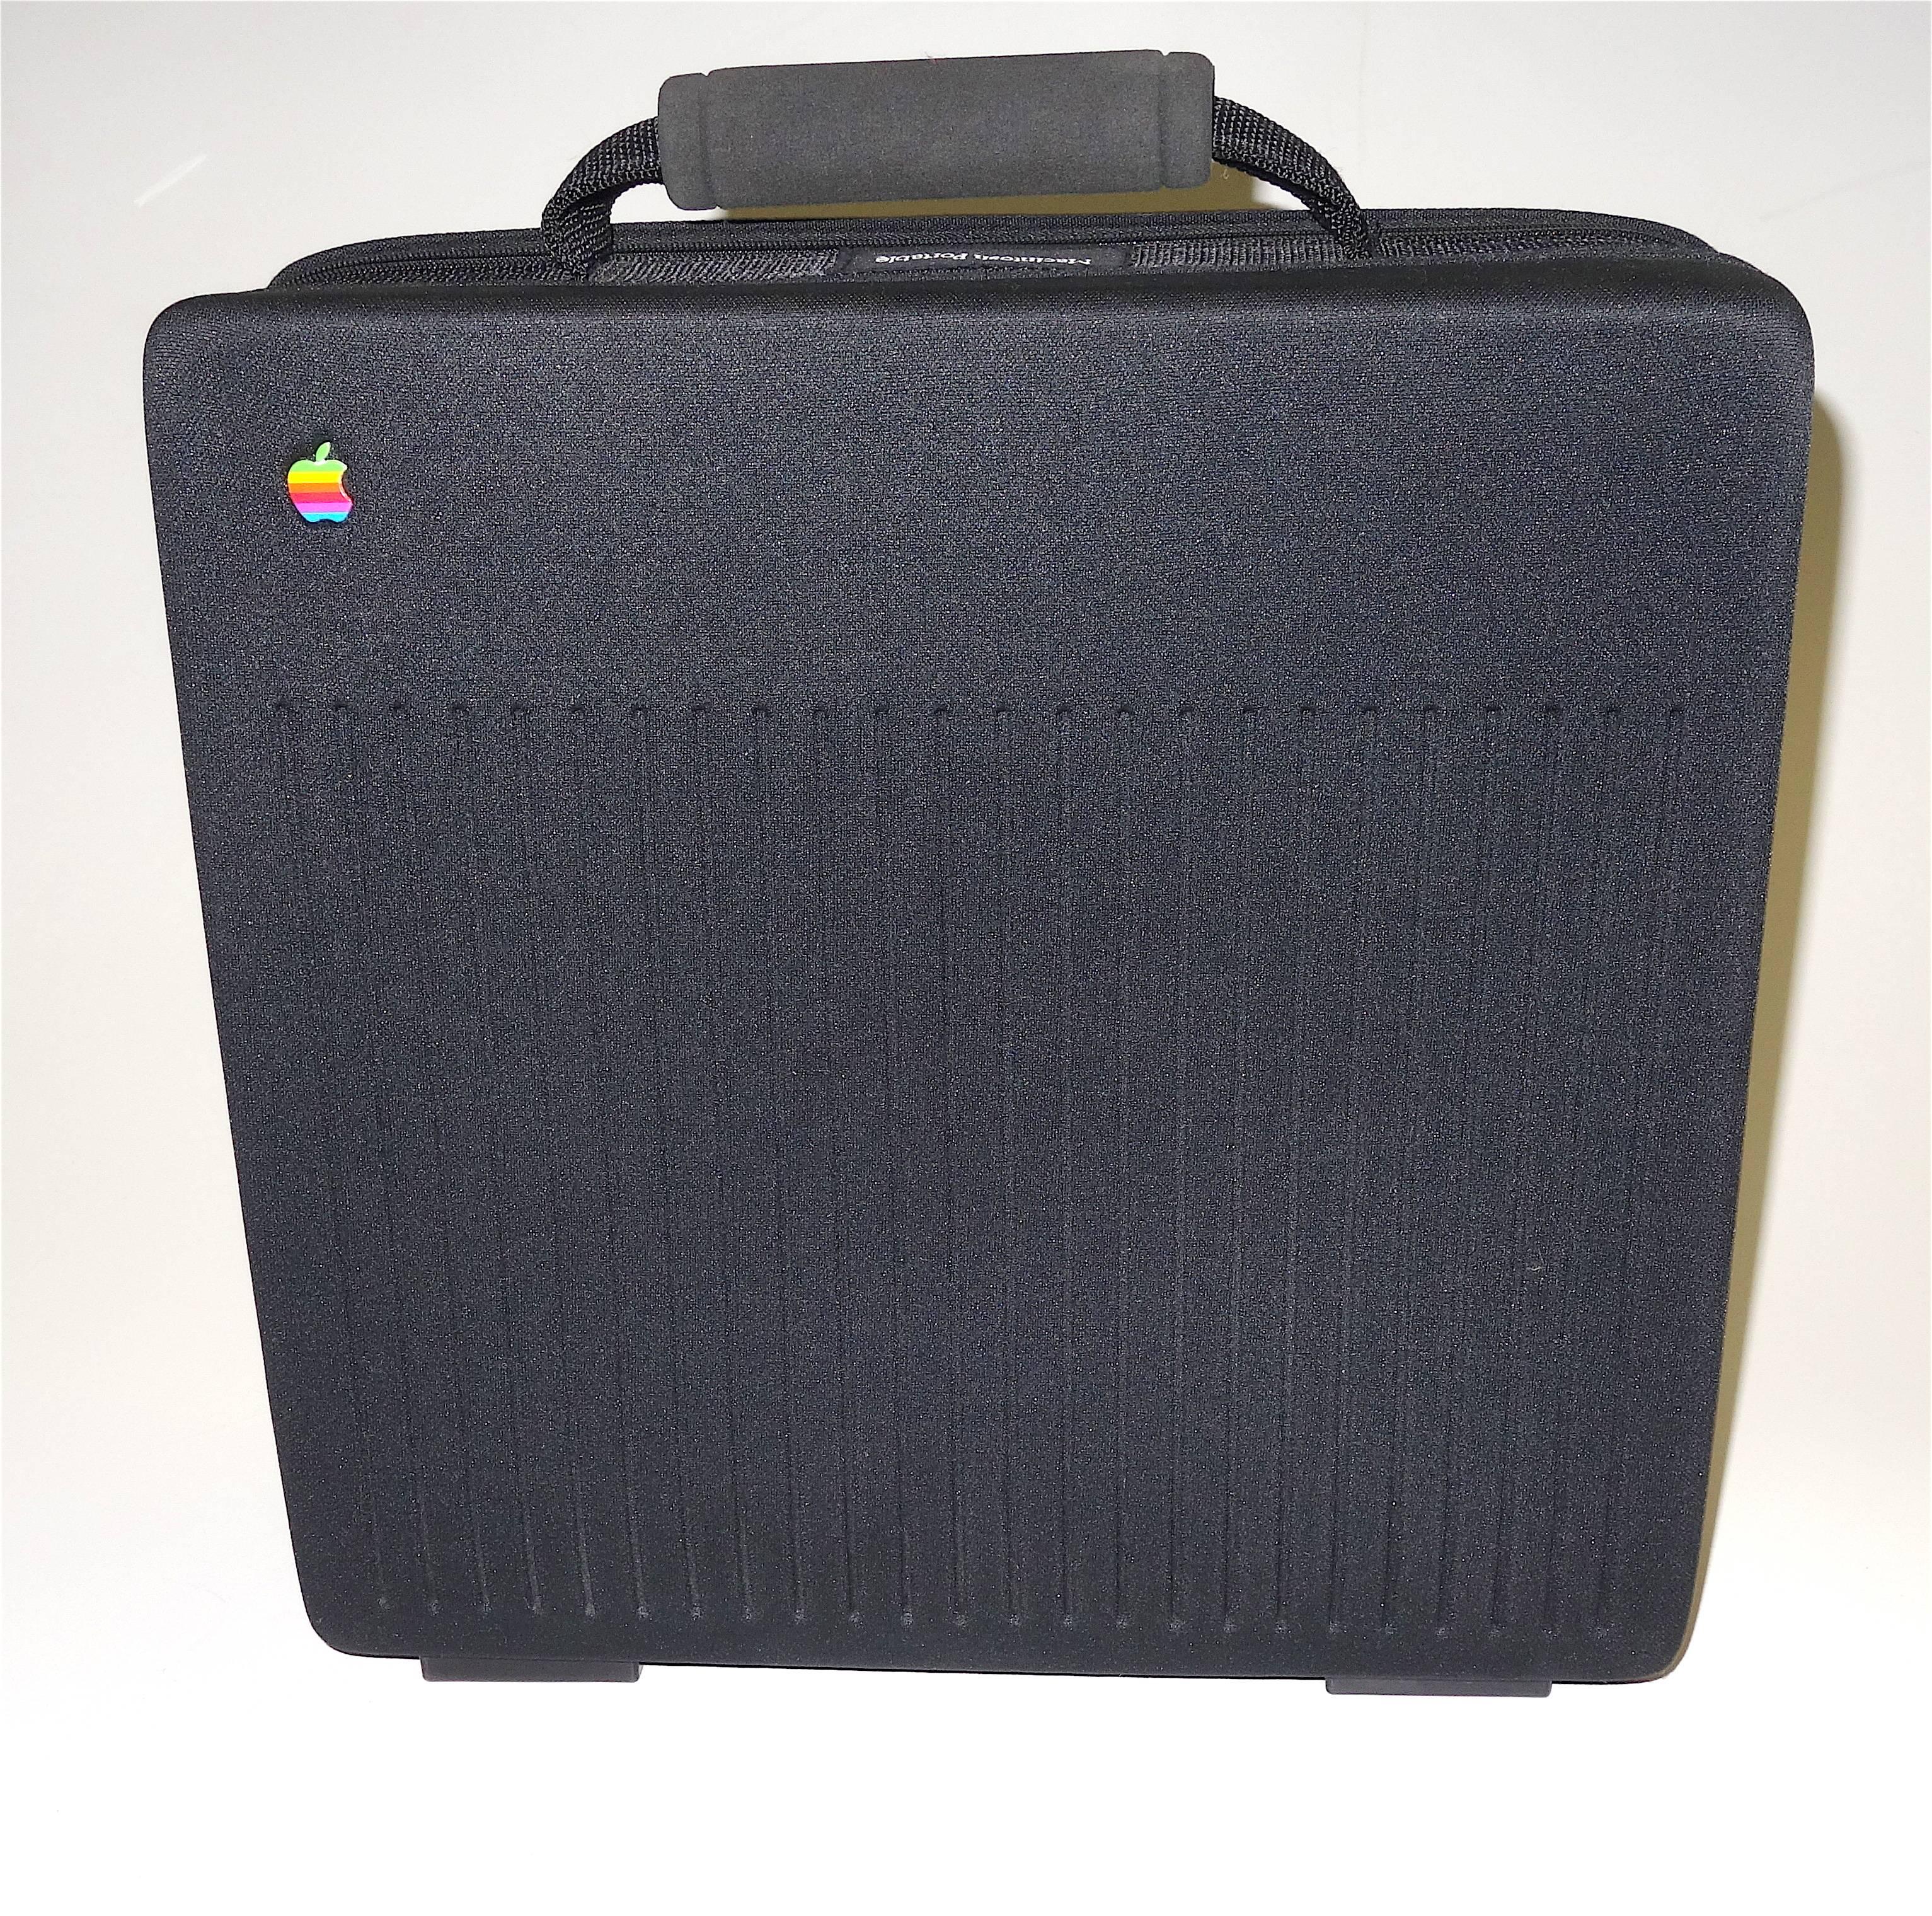 American First Macintosh Portable Computer, As New, Vintage Iconic RARE Steve Jobs Design For Sale